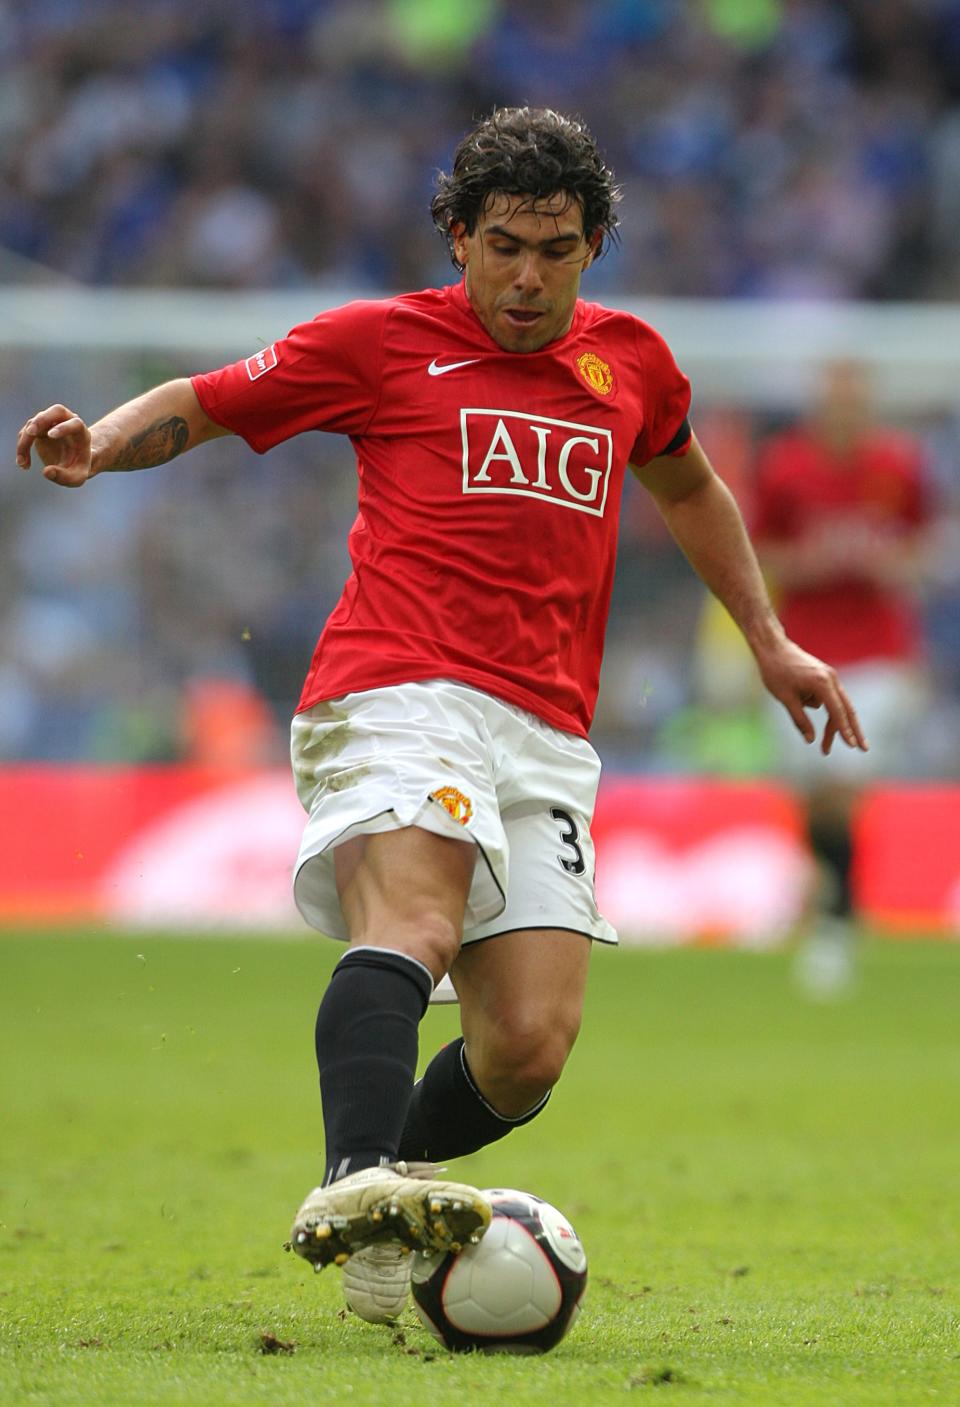 Carlos Tevez, Manchester United   (Photo by Nick Potts - PA Images/PA Images via Getty Images)